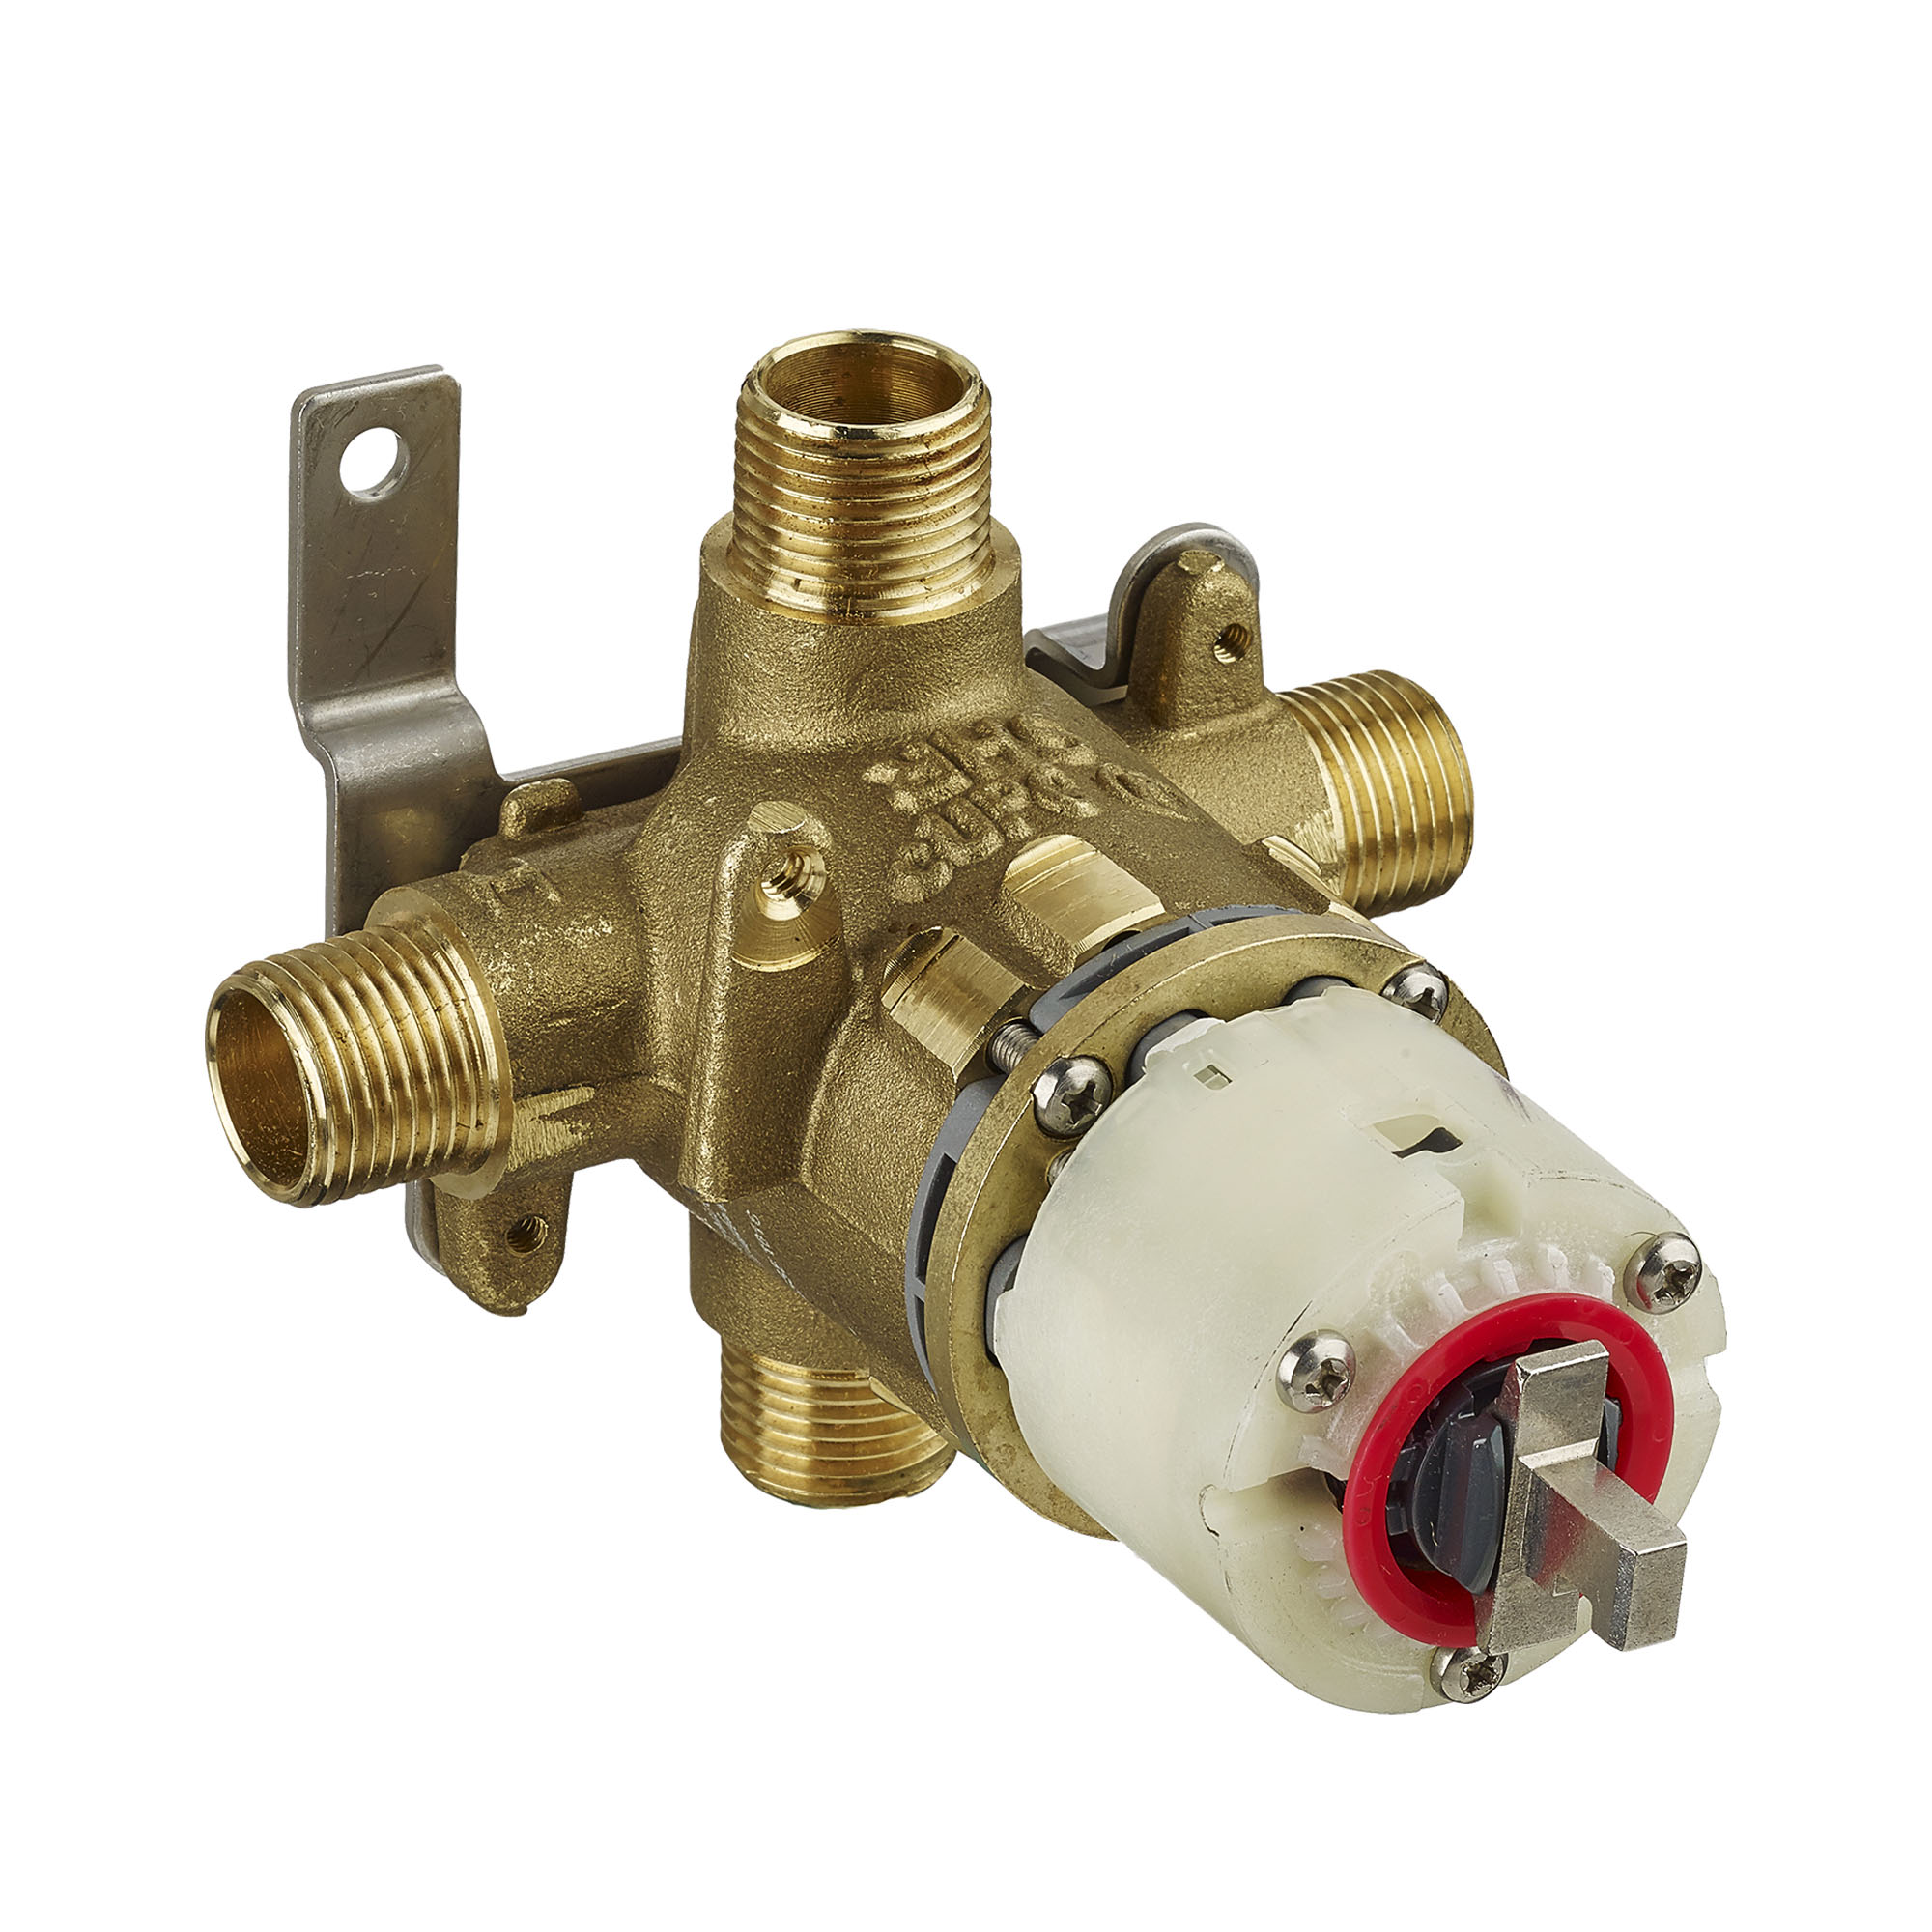 Pressure Balance Temperature Control Rough Valve Only 1/2" Universal Inlets/Outlets w/Screwdriver Stops